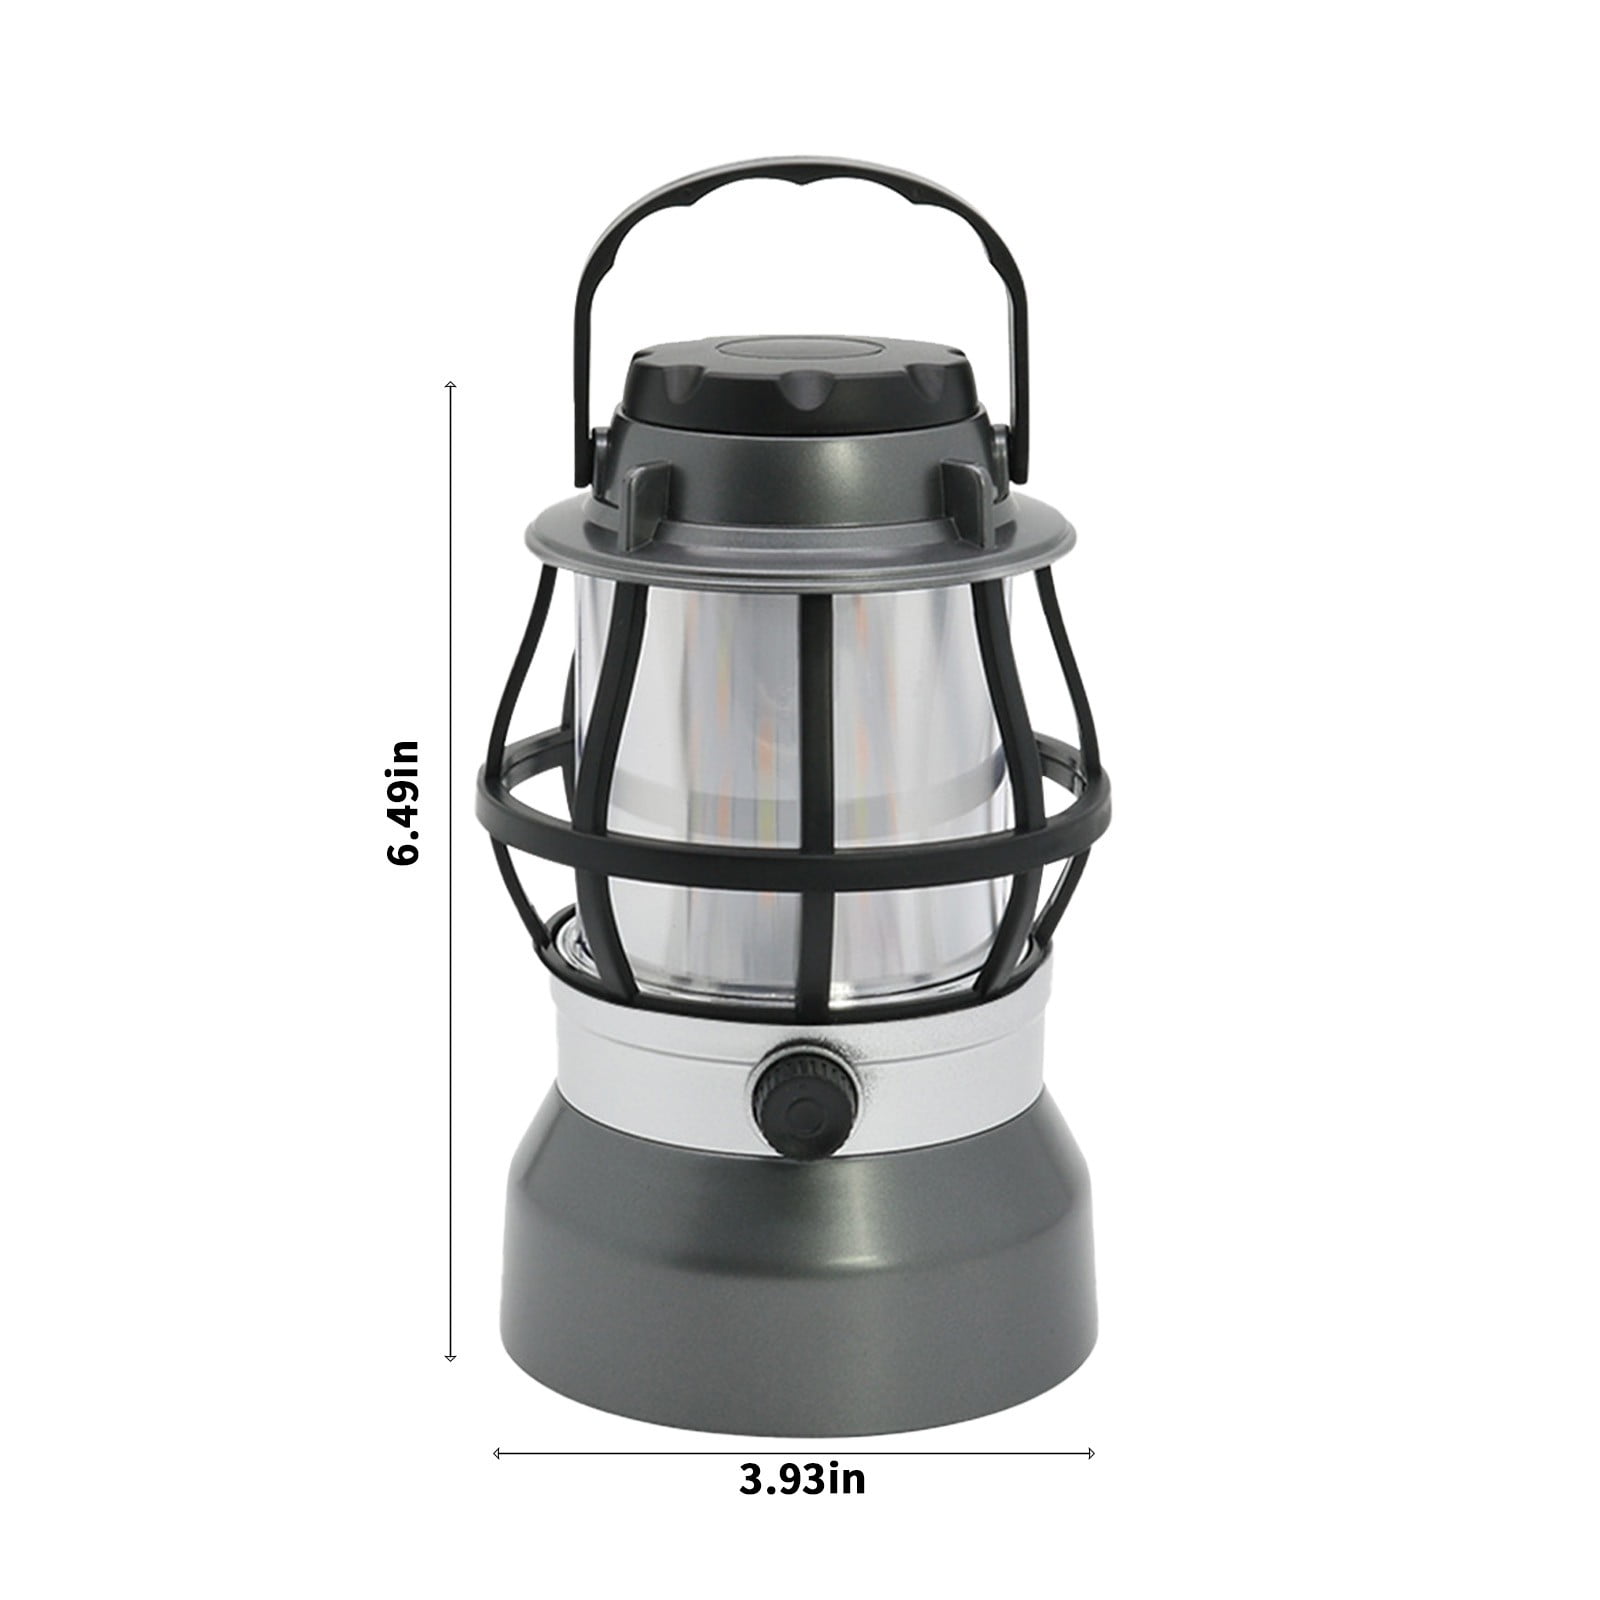 Outask Telescopic Lantern Multifunctional Outdoor Camping Light All Terrain  Treasure Travel Emergency Tent Lamps Phone Charging - AliExpress